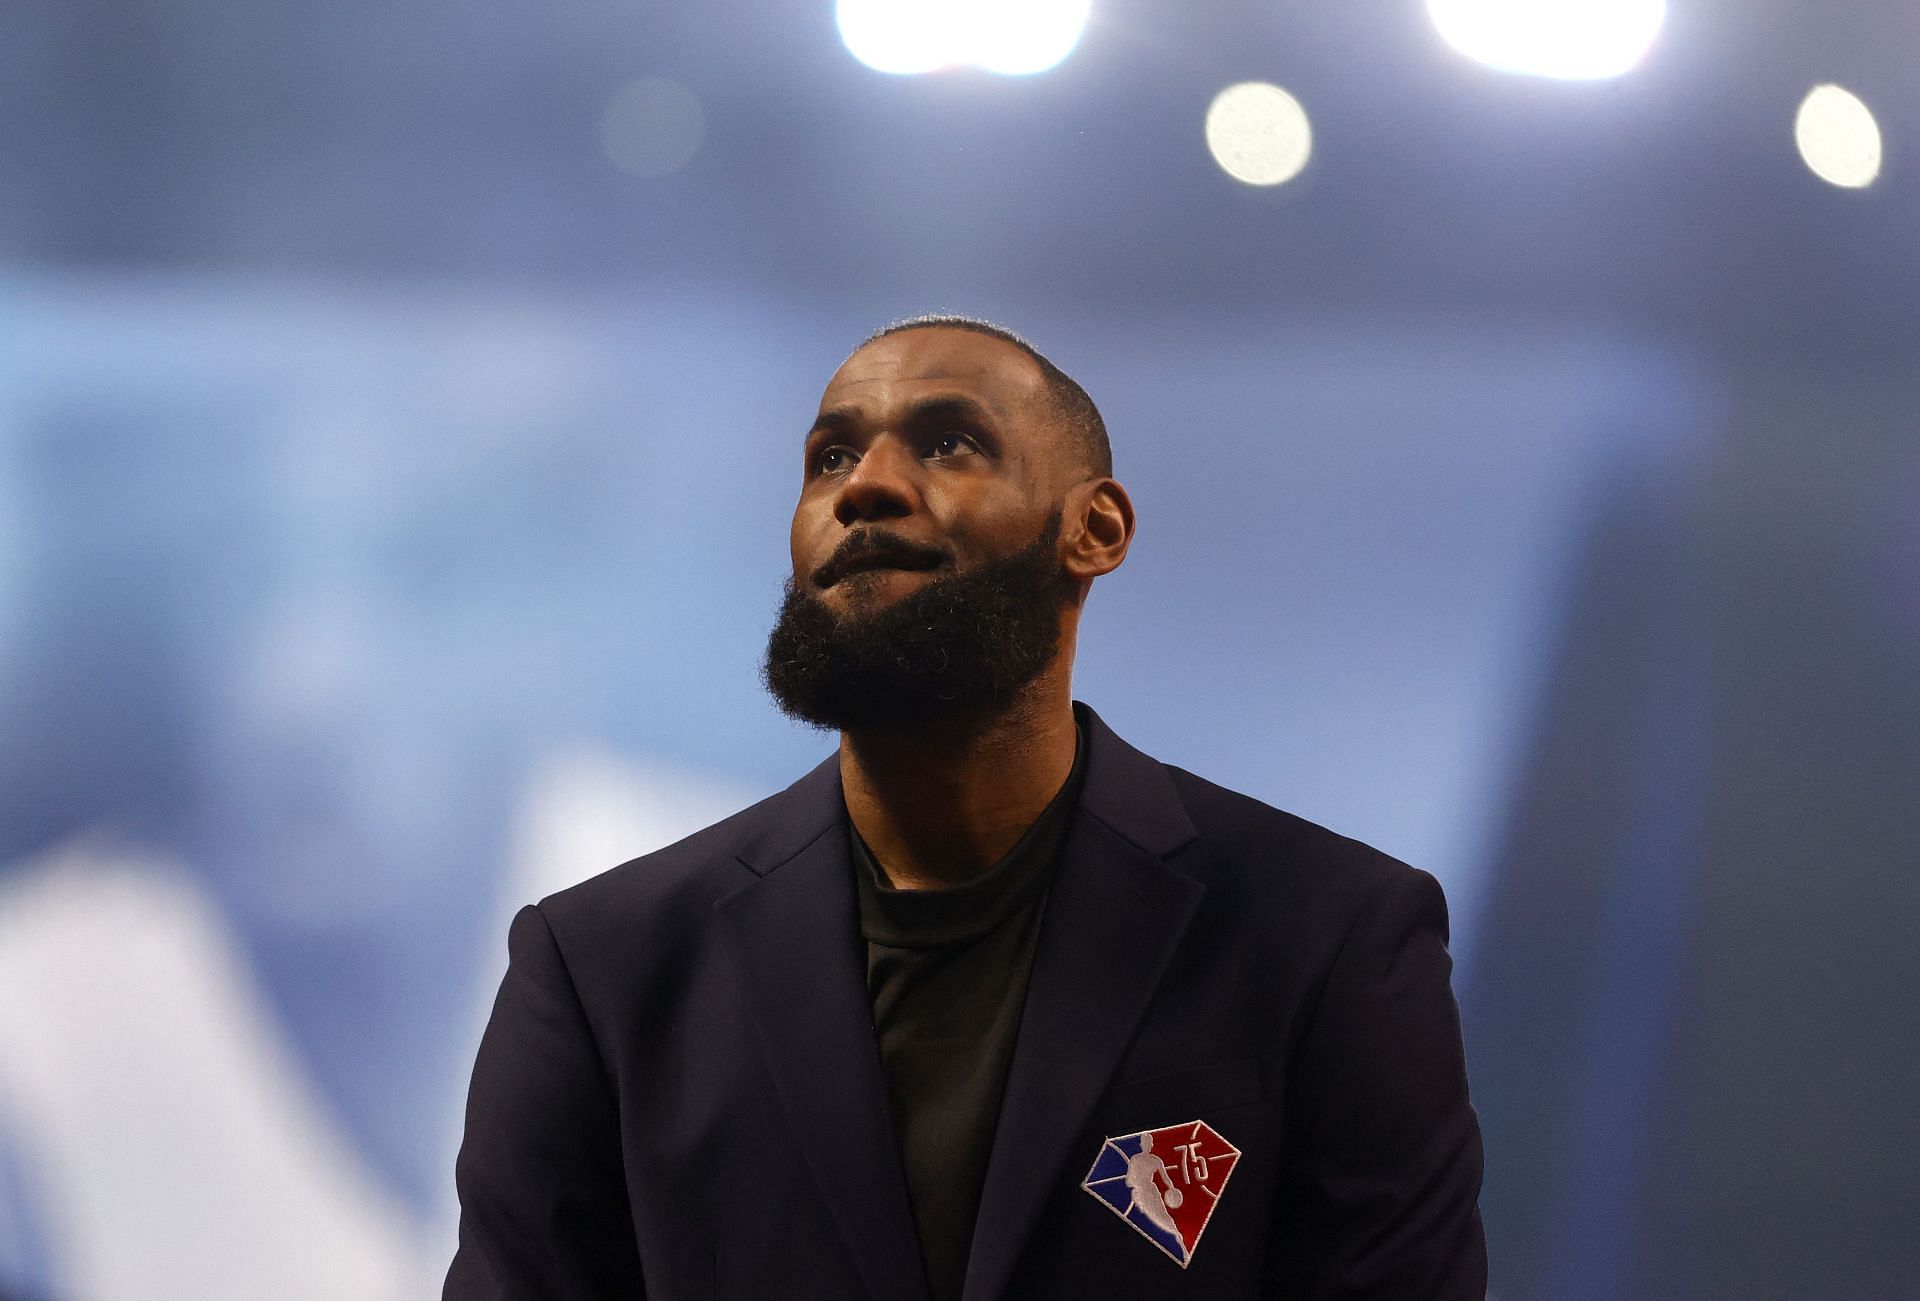 LeBron James introduced in the NBA 75th Anniversary Team during the 2022 All-Star Game